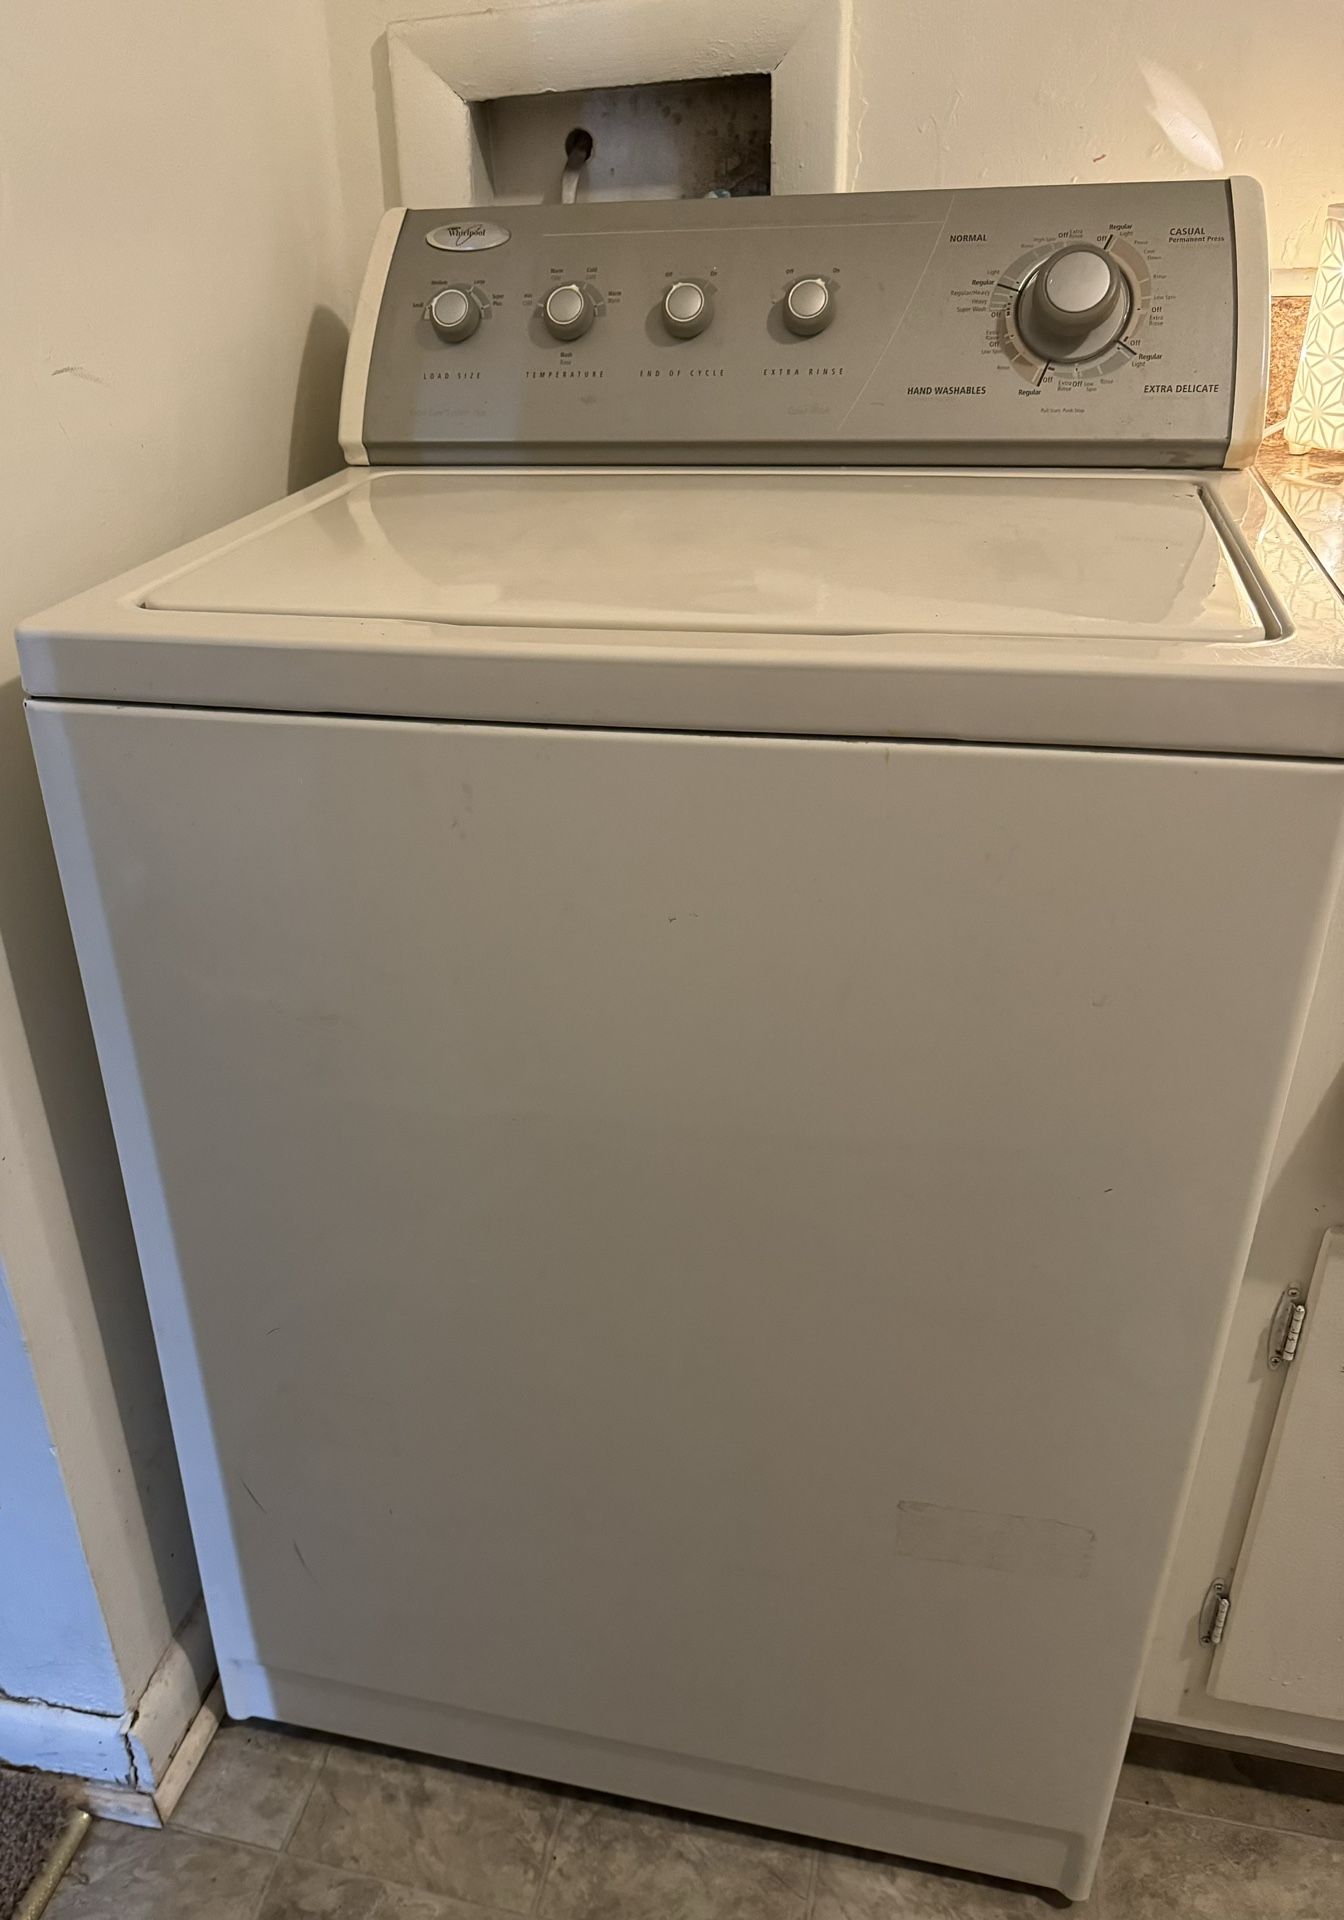 Whirlpool Washer And Dryer For sale 